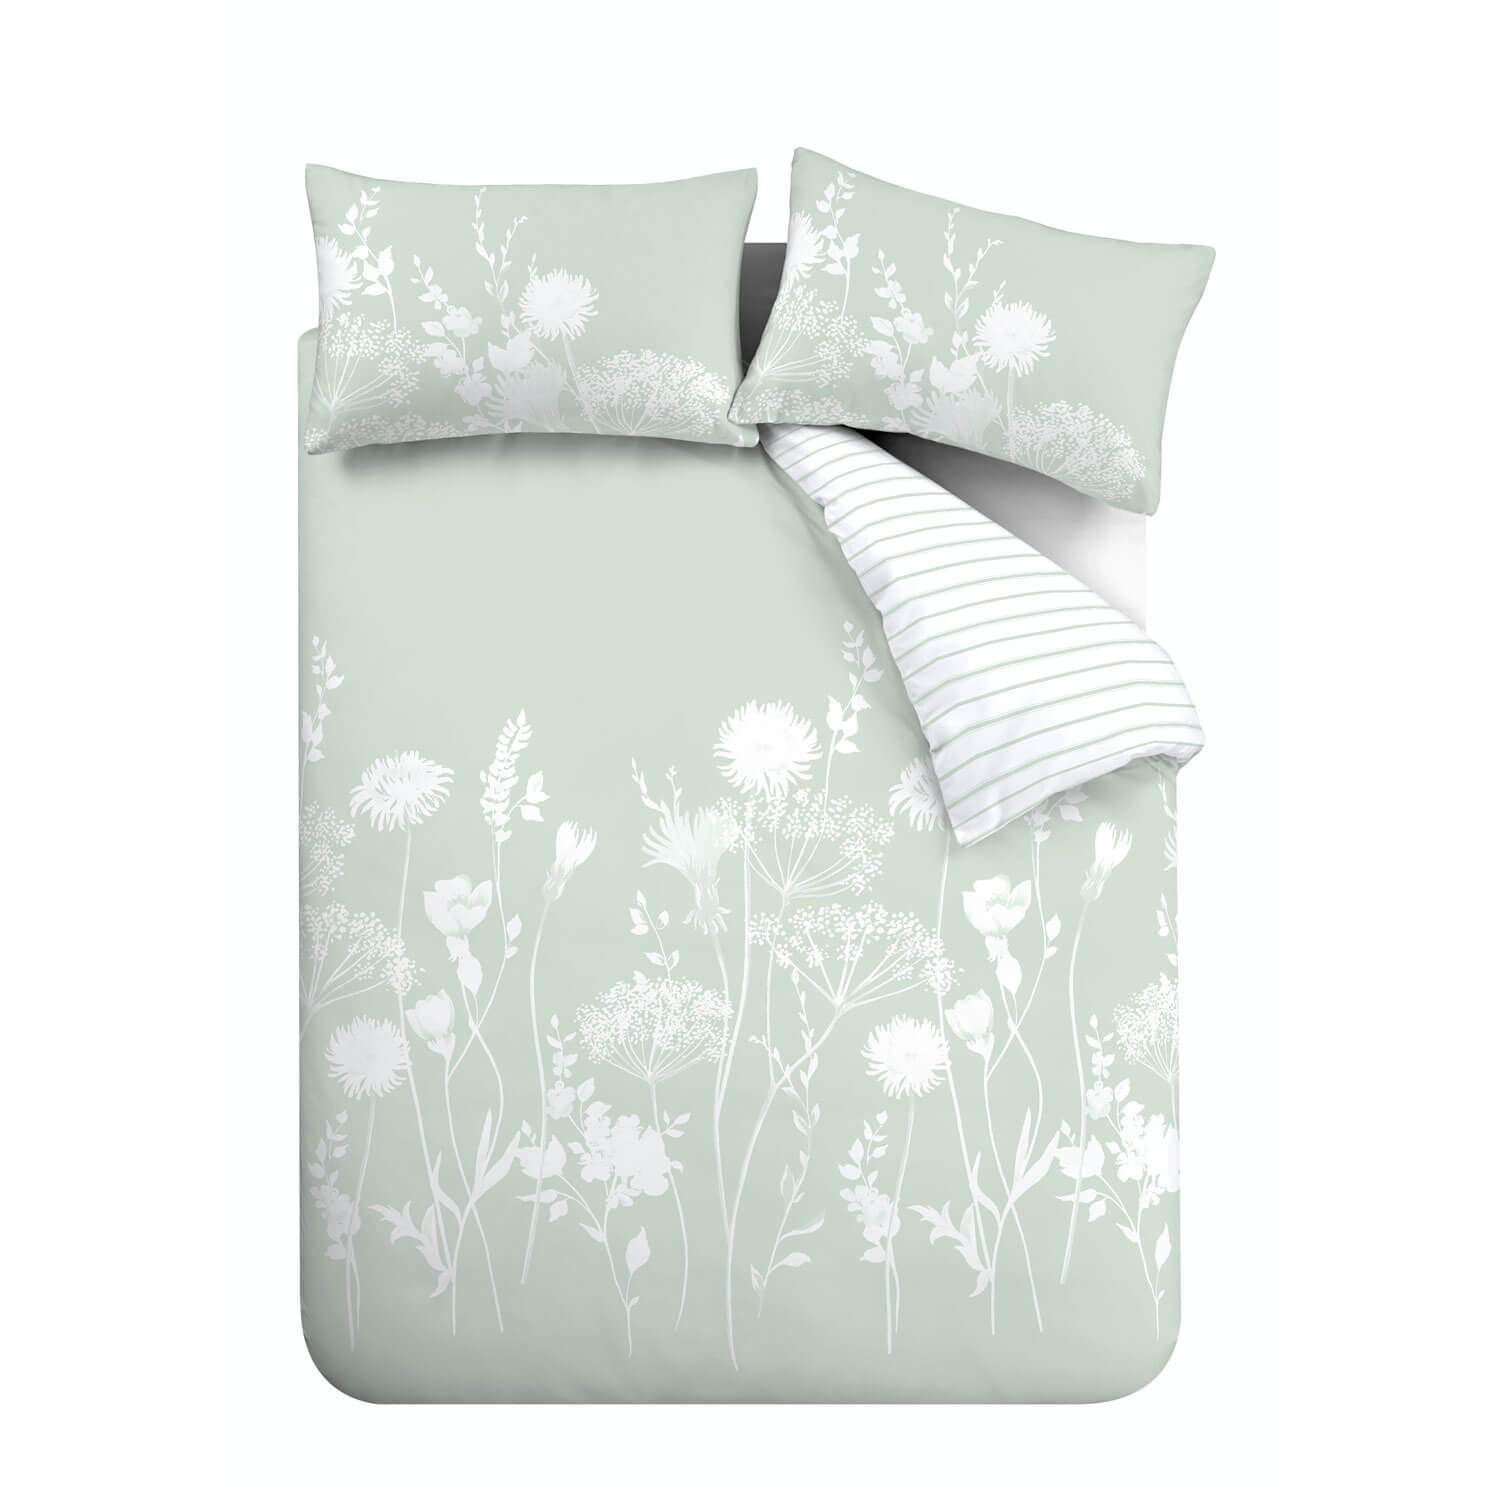  The Home Collection Meadowsweet Floral Duvet Cover Set - White/Green 1 Shaws Department Stores